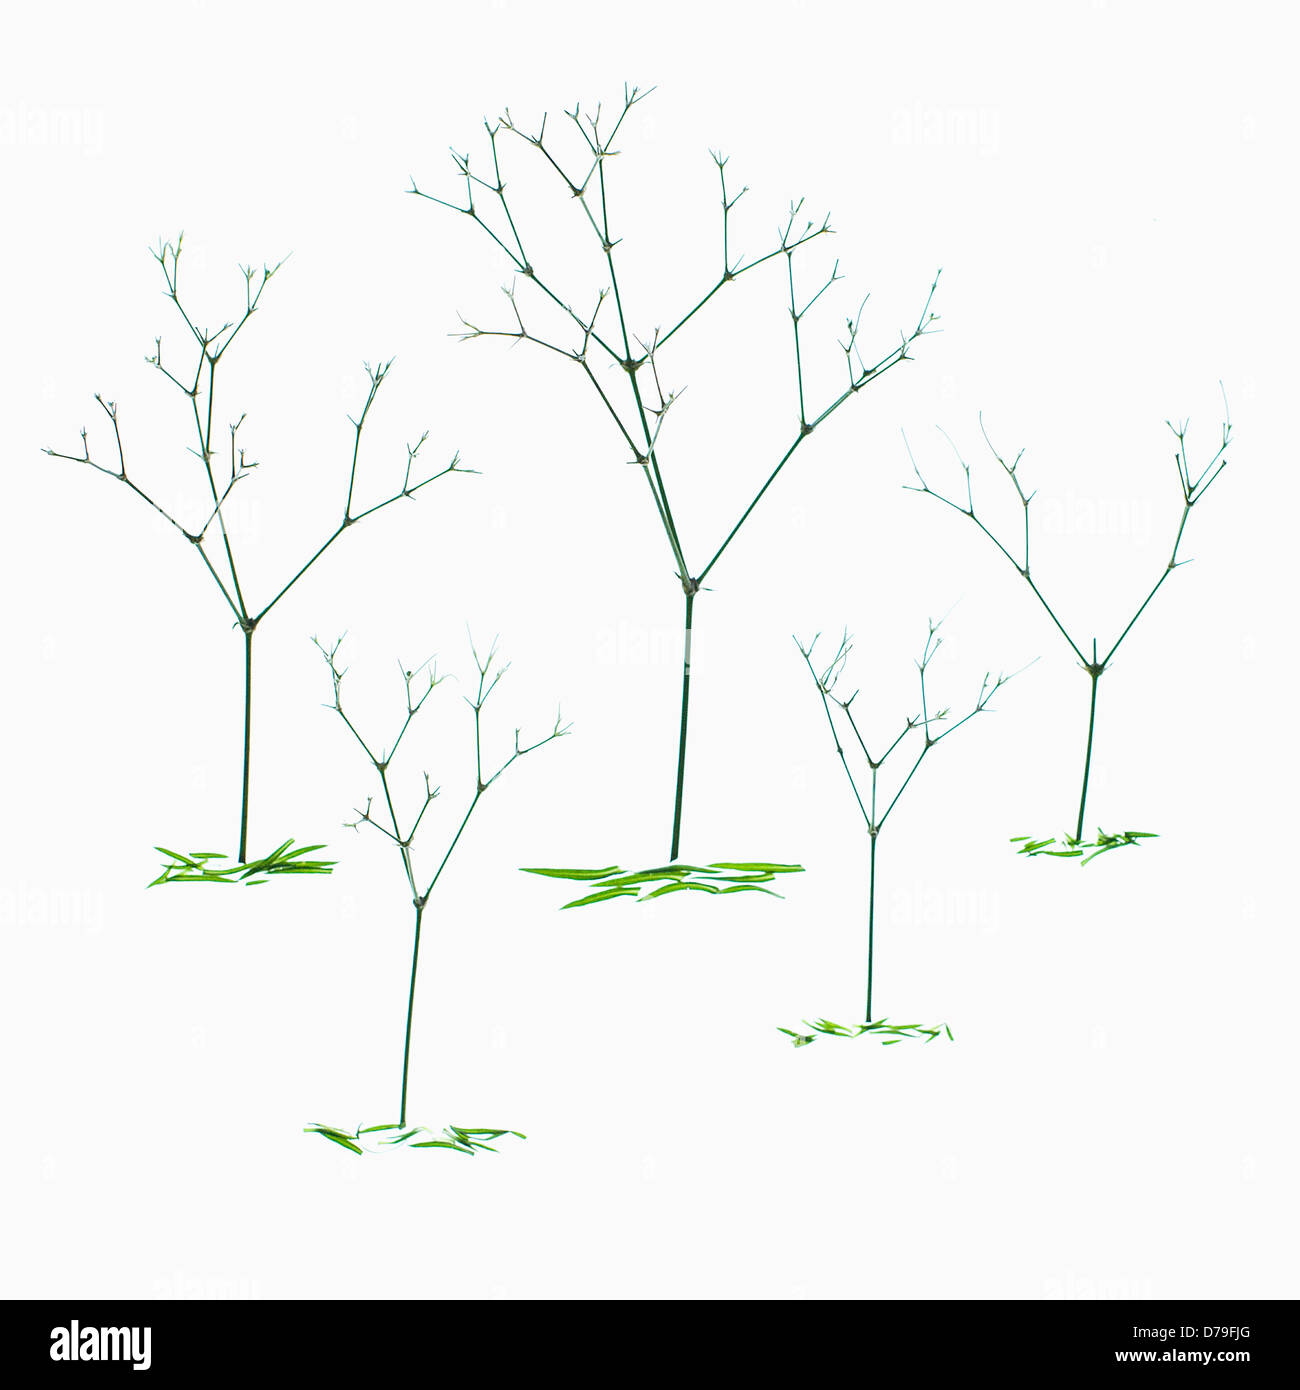 Gypsophila Paniculata 'Blancanieves' Stem of Gypsophila arranged to create abstract image with appearance of trees with fallen Stock Photo